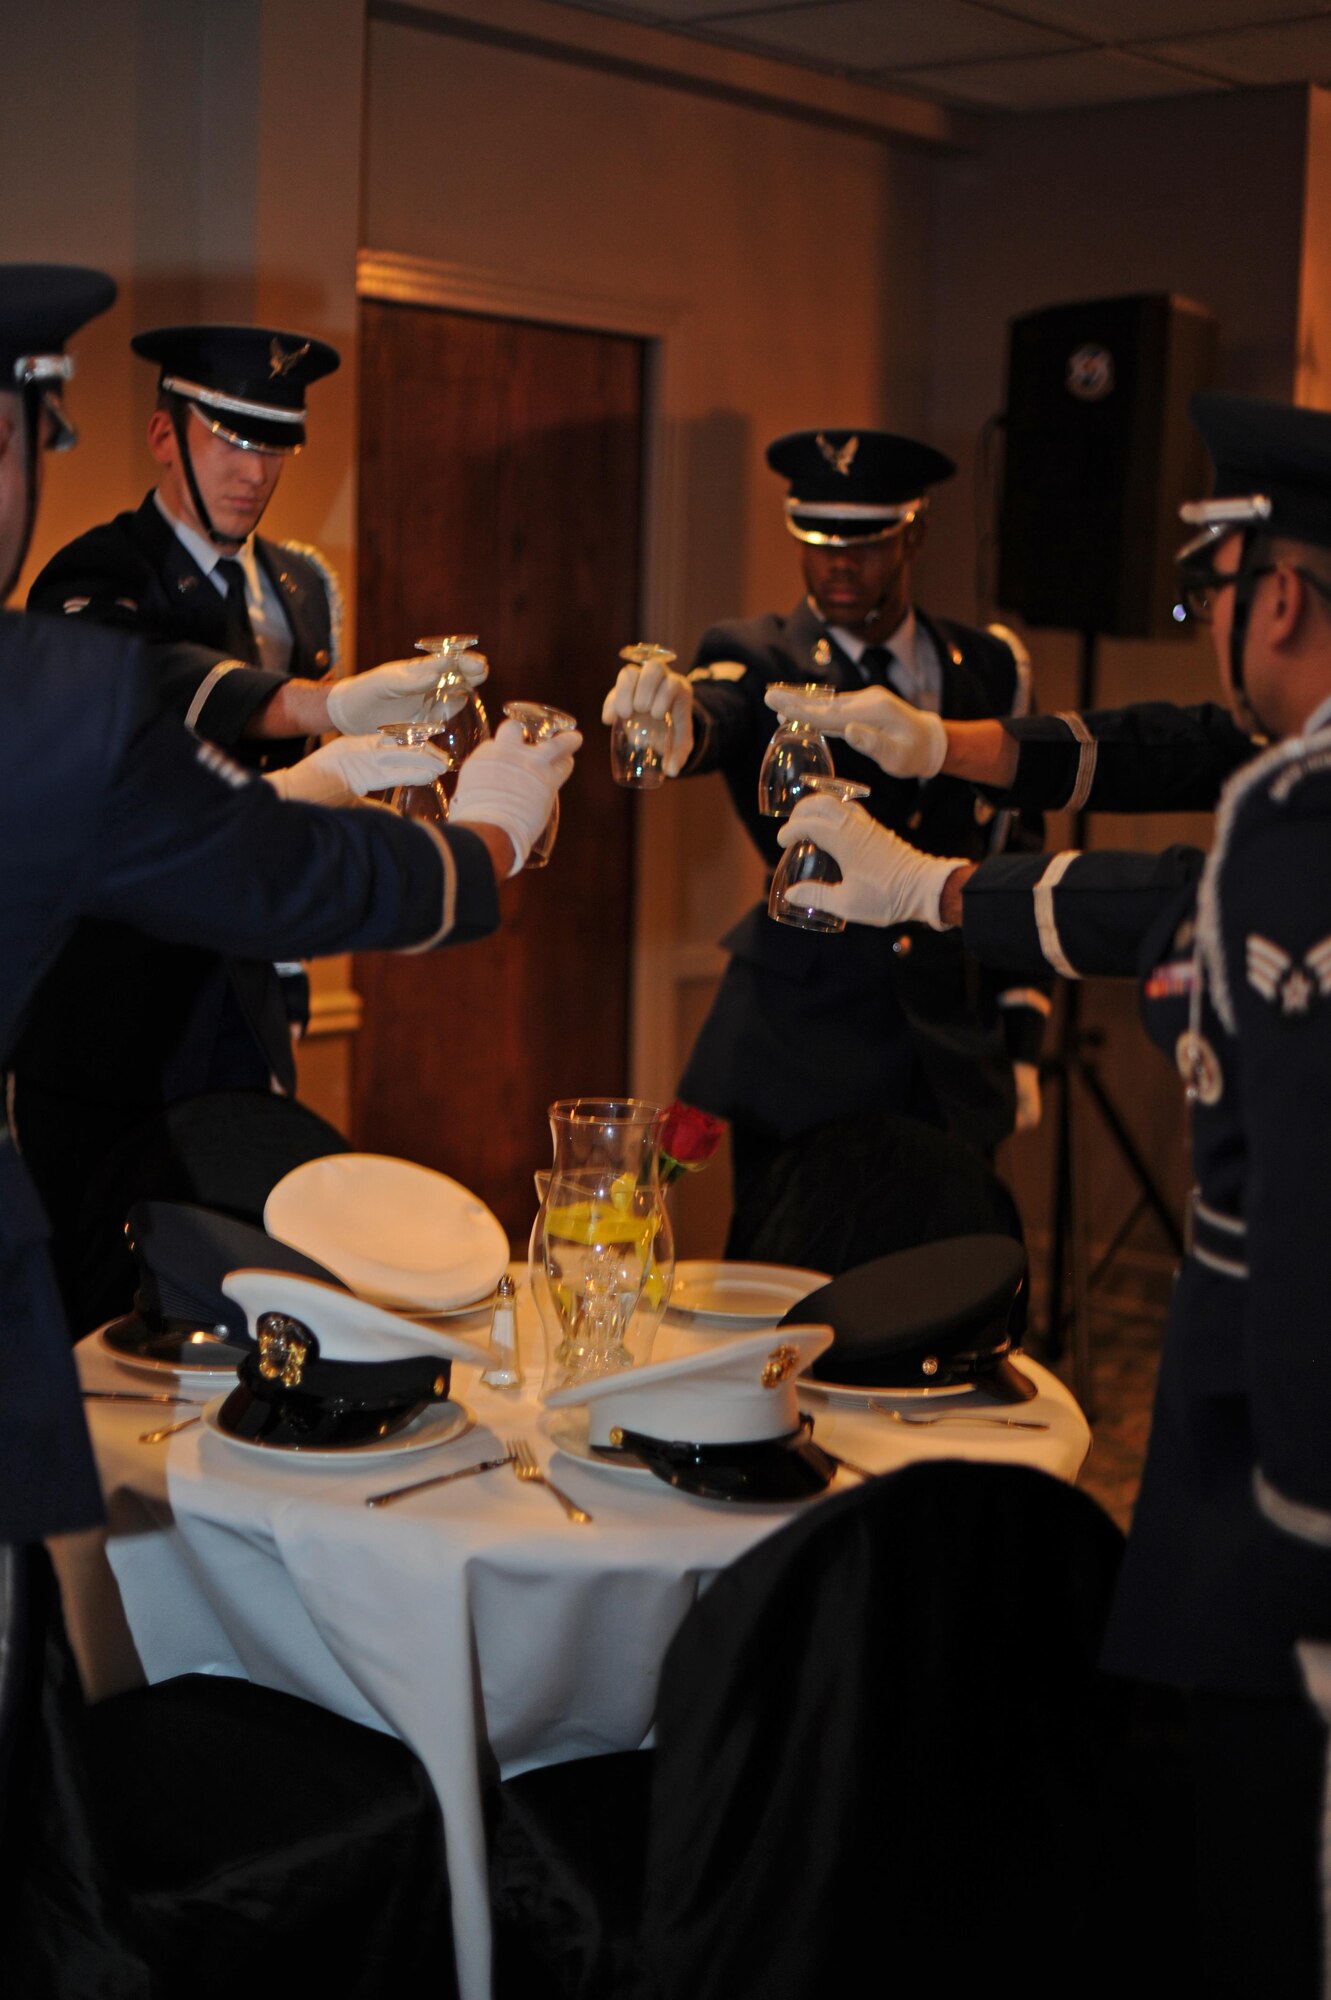 Members of the Laughlin Honor Guard set the POW/MIA dinner table at the Air Force Ball on Laughlin Air Force Base, Texas, Sept. 30, 2017.  The POW/MIA table is an observance for the military’s brothers and sisters-in-arms who were prisoners of war or missing in action during any time of conflict.